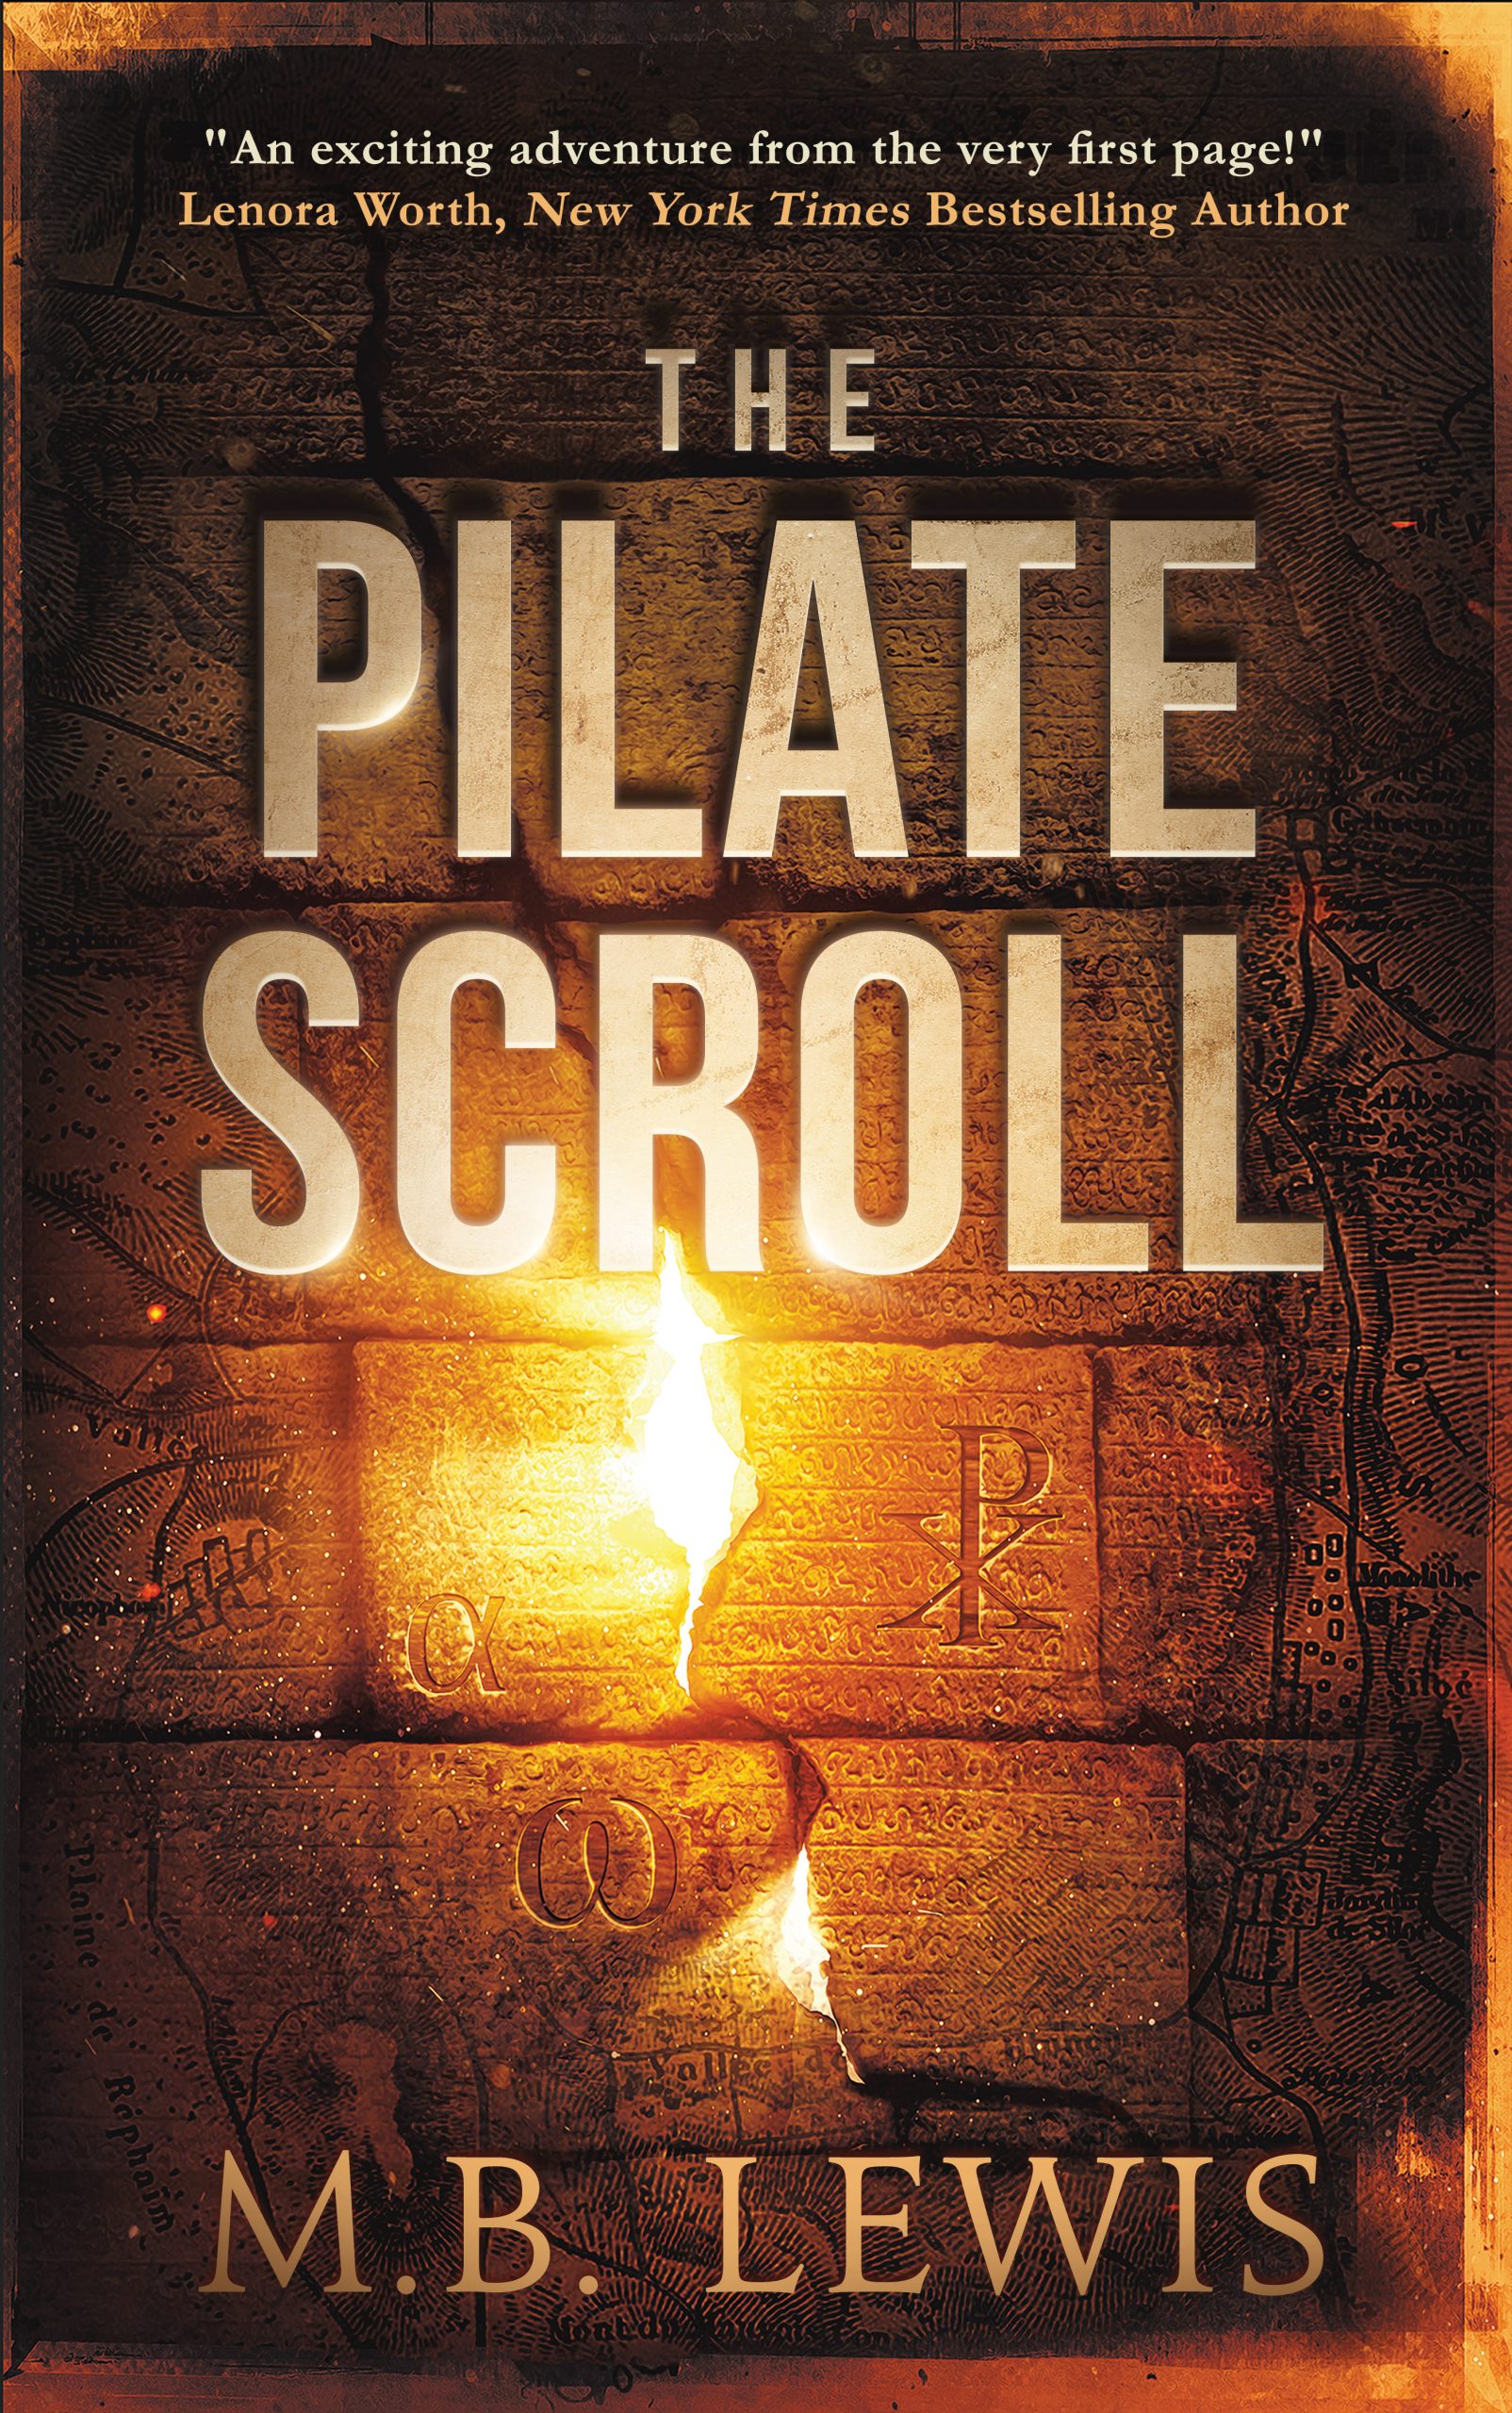 The Pilate Scroll by M.B. Lewis